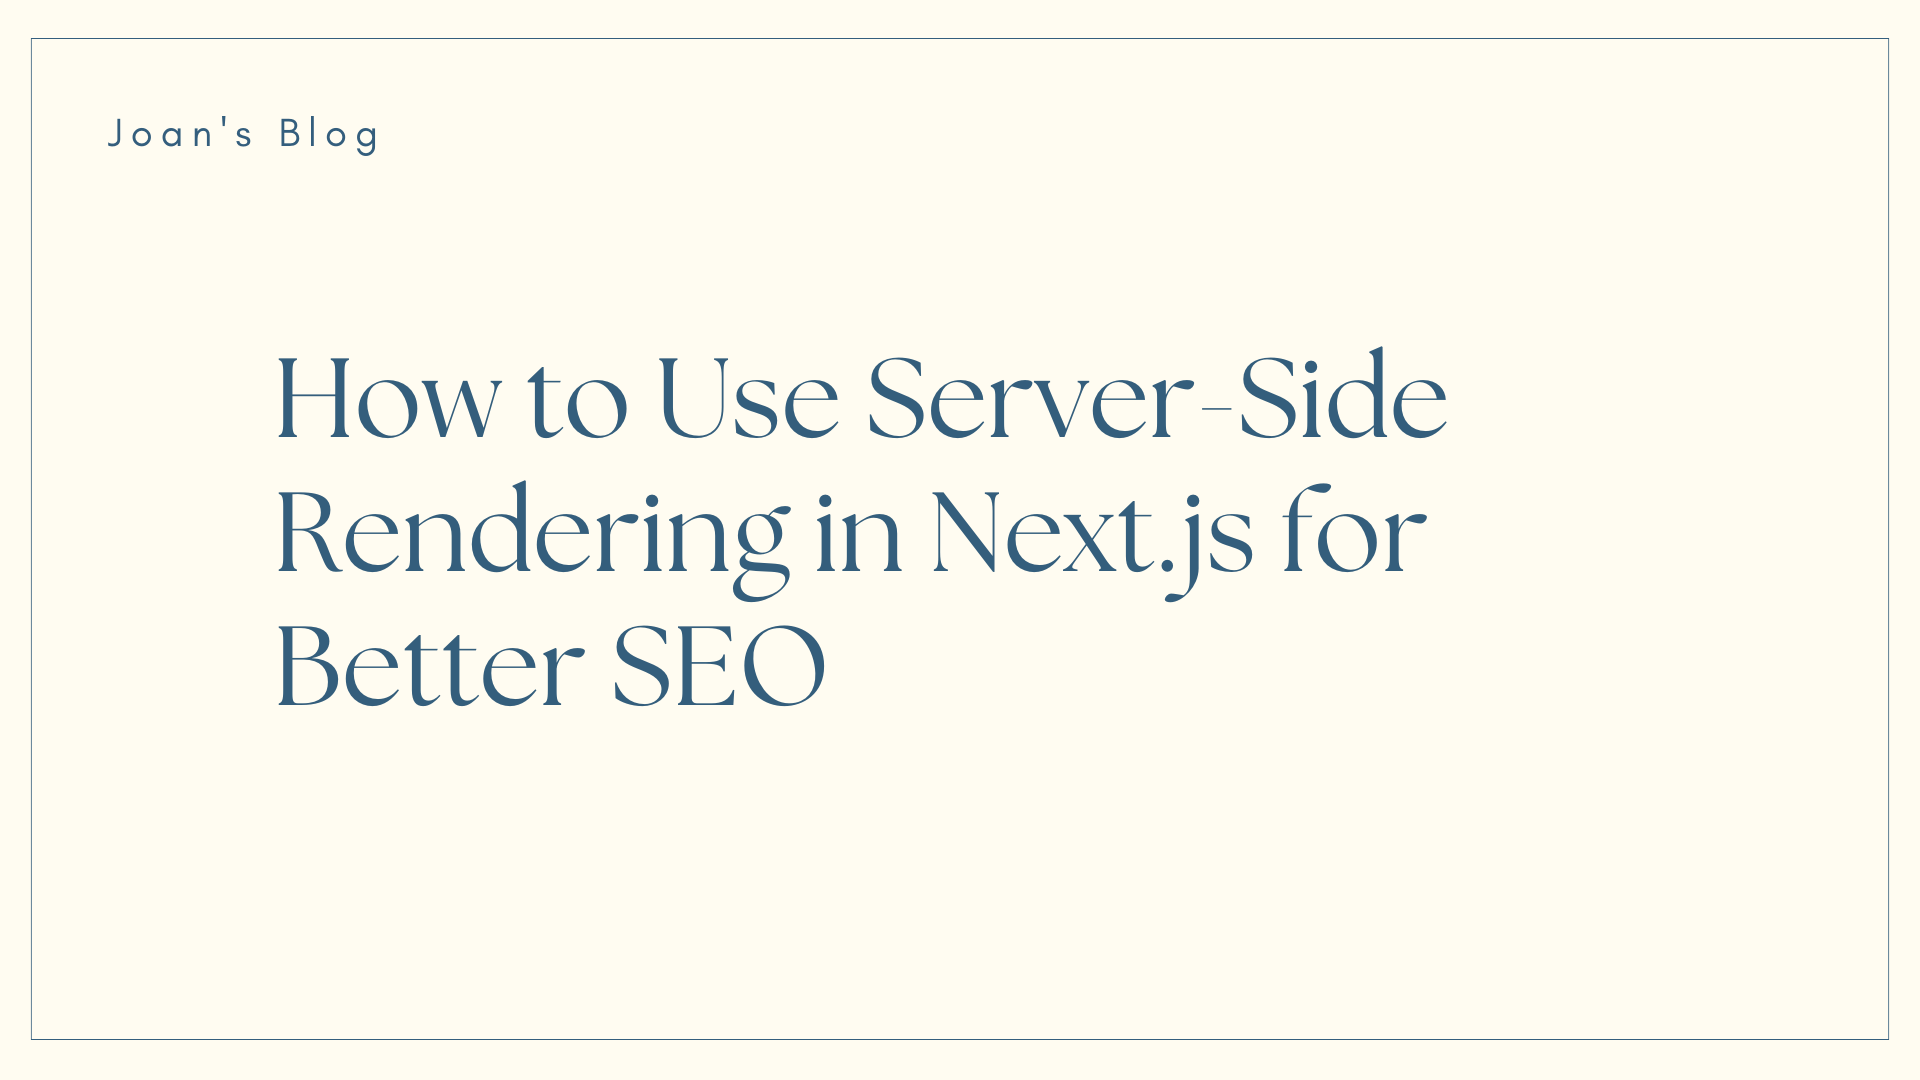 How to Use Server-Side Rendering in Next.js Apps for Better SEO